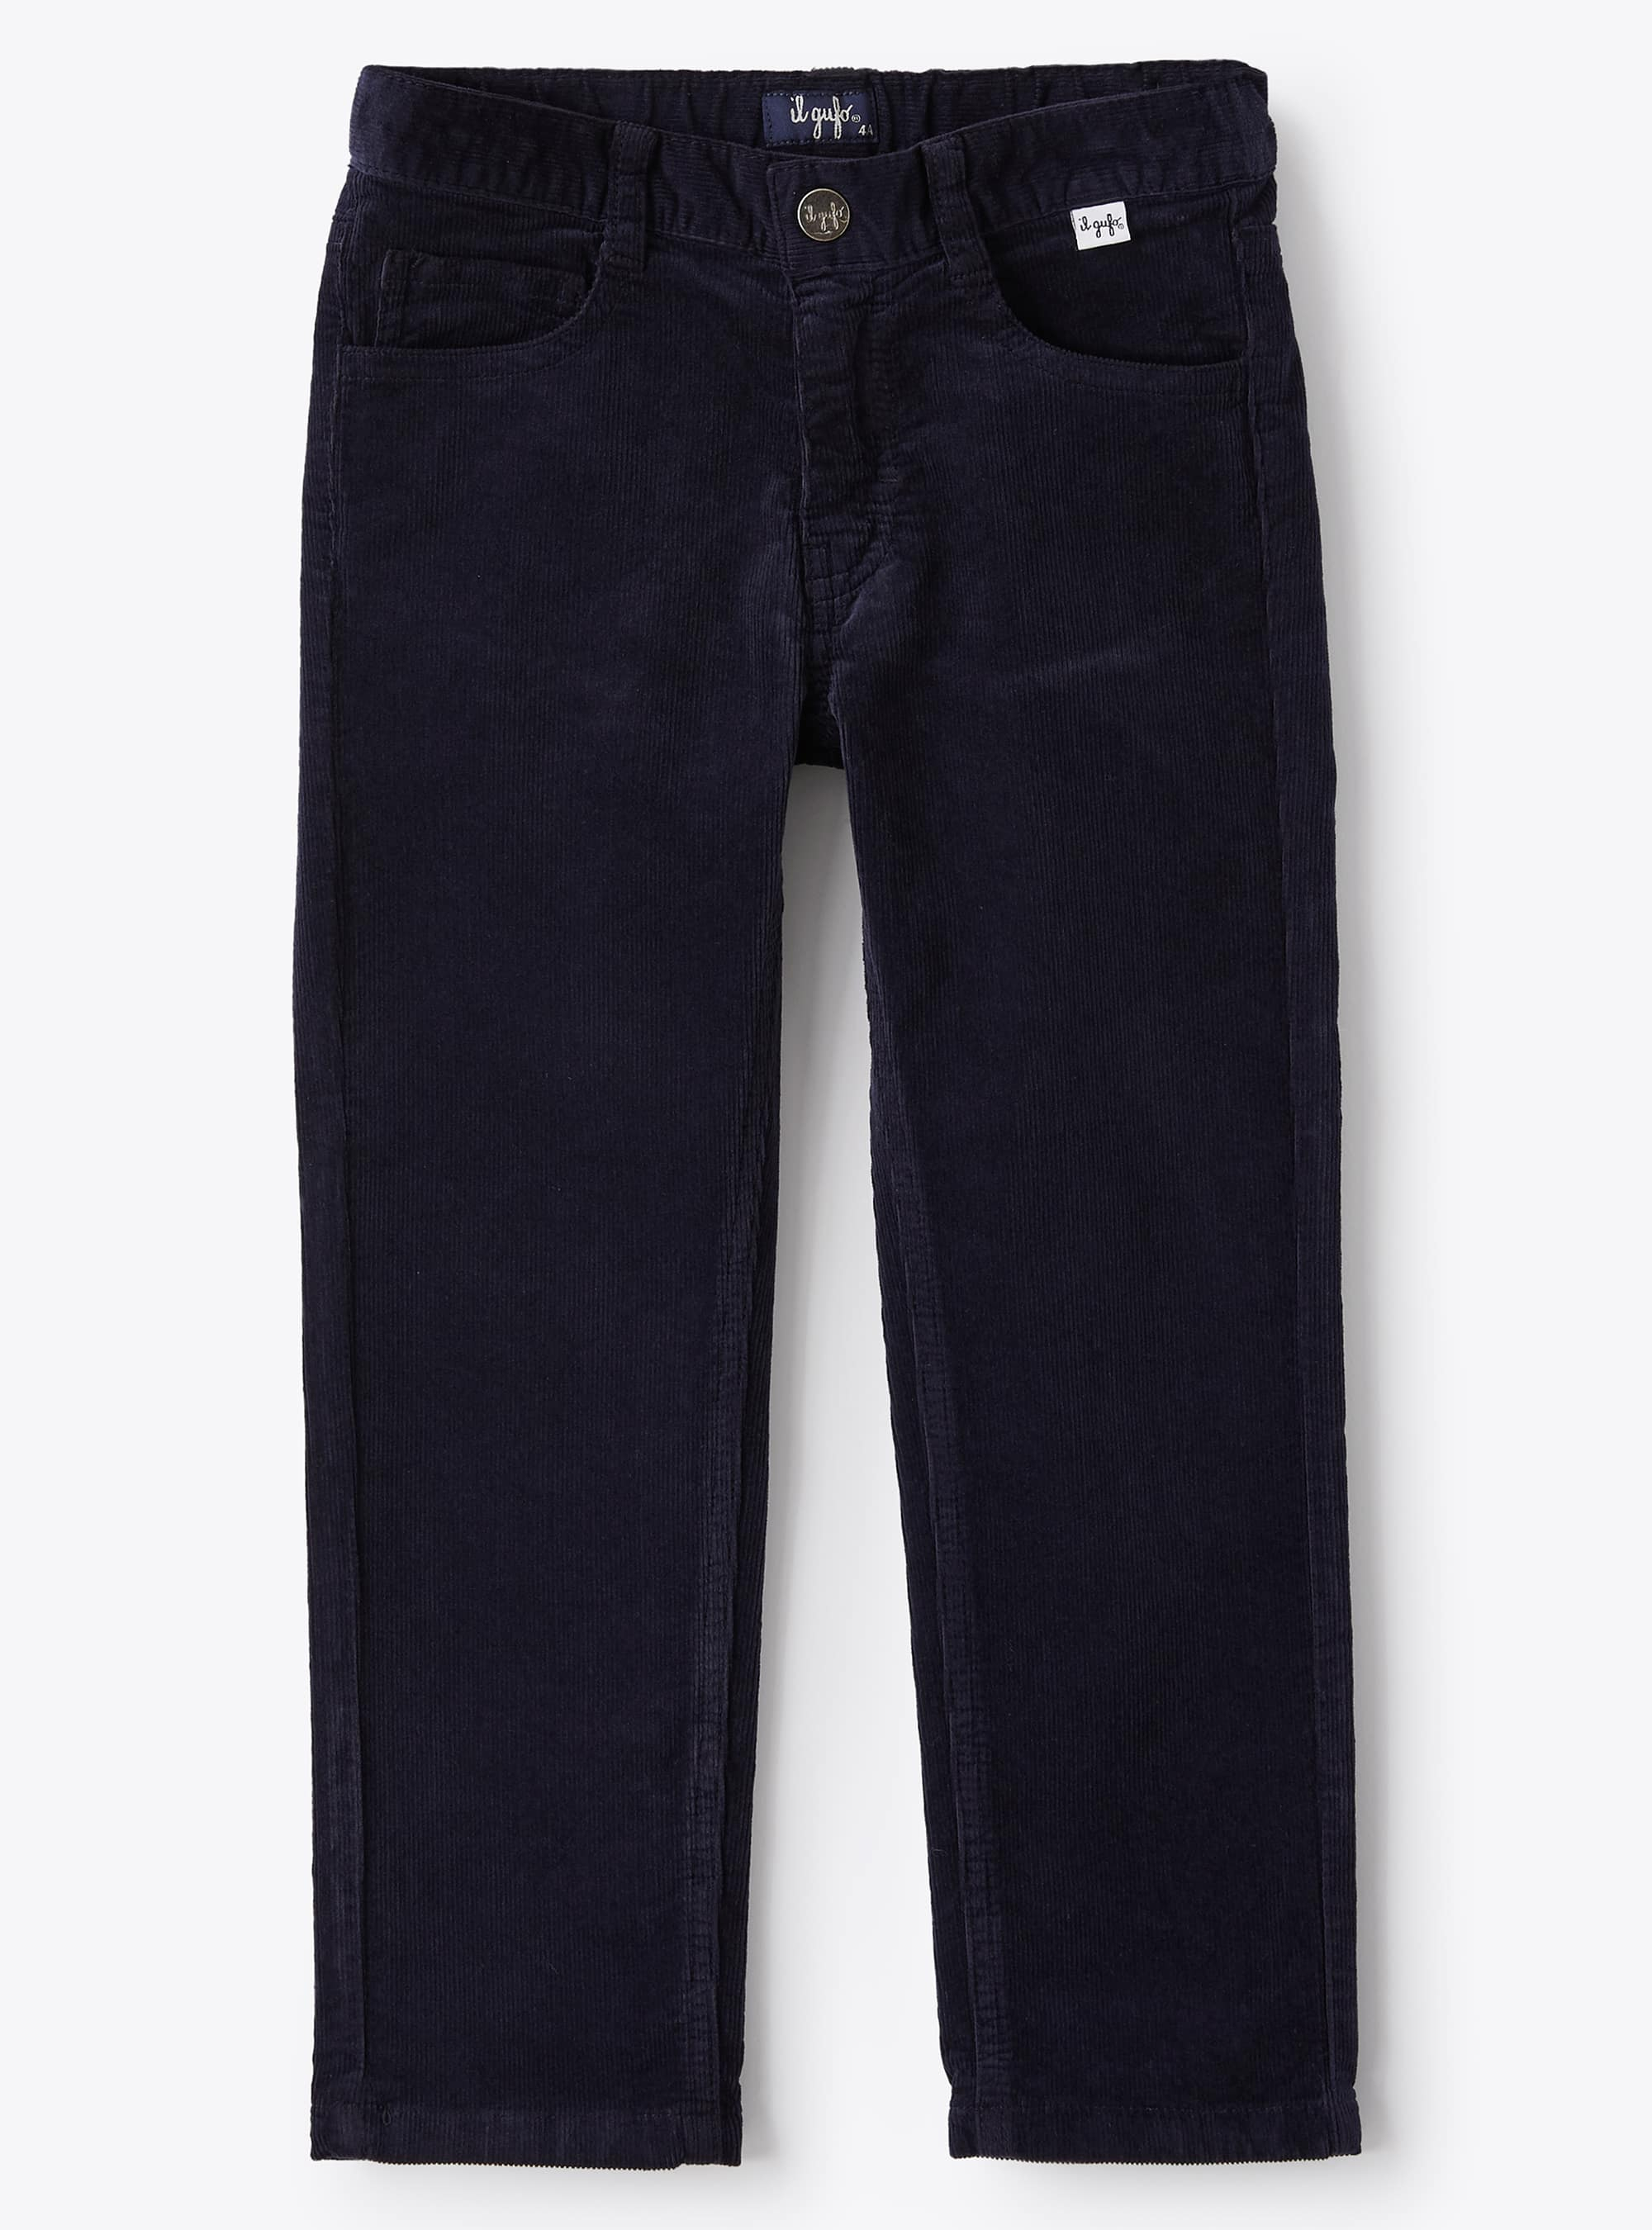 Regular fit navy corduroy trousers - Trousers - Il Gufo